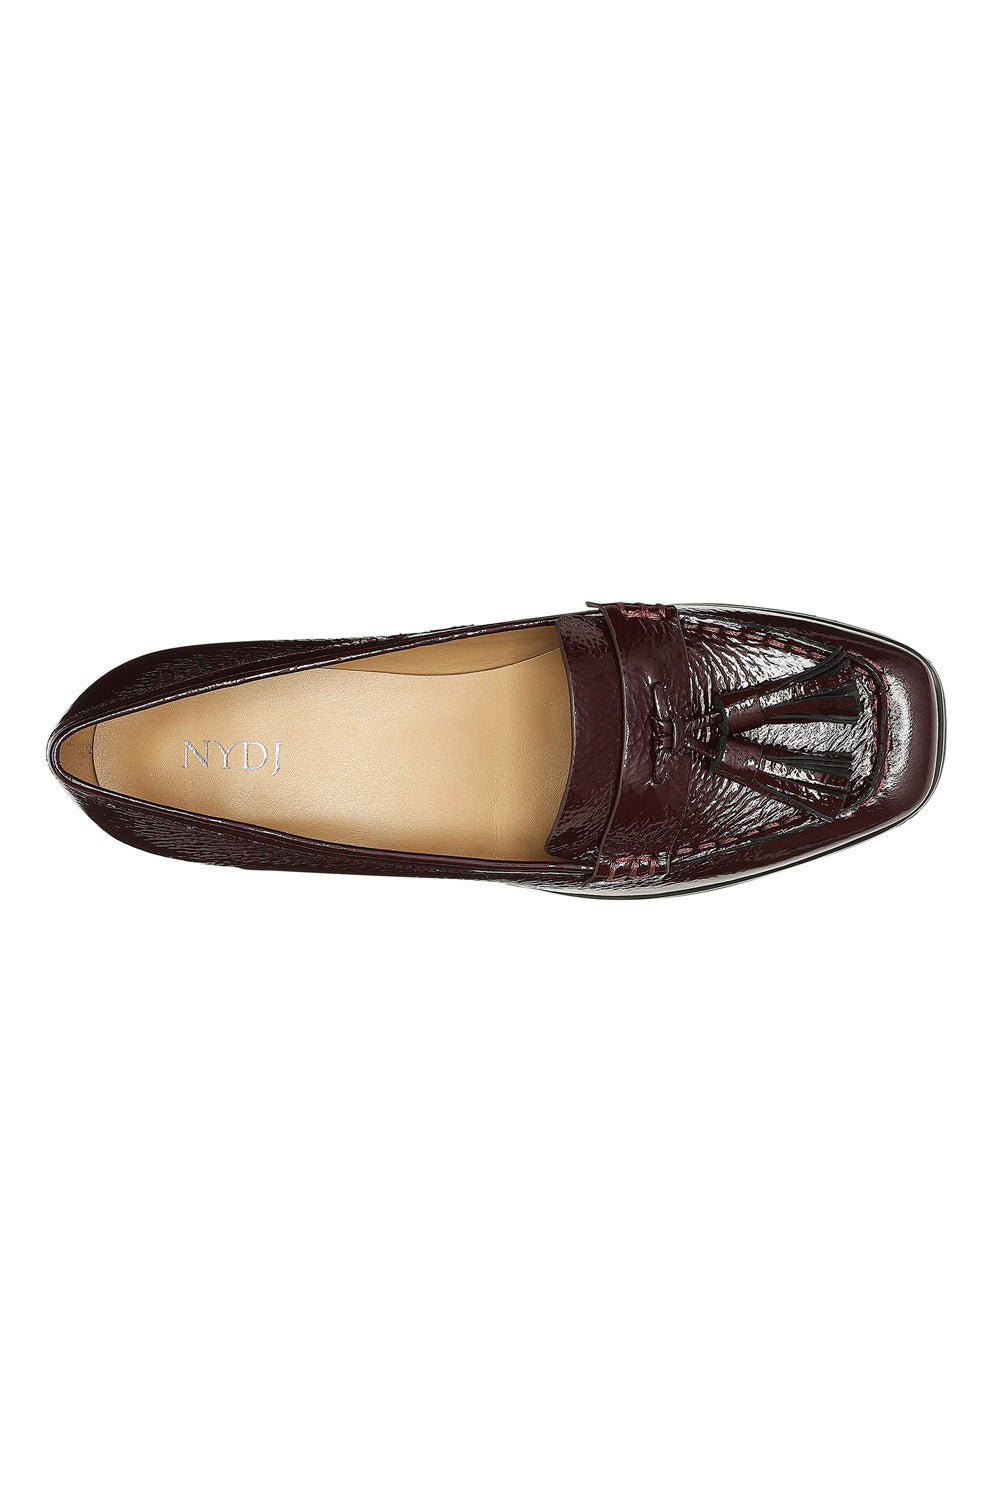 NYDJ Dexter Loafers In Patent Leather - Wine